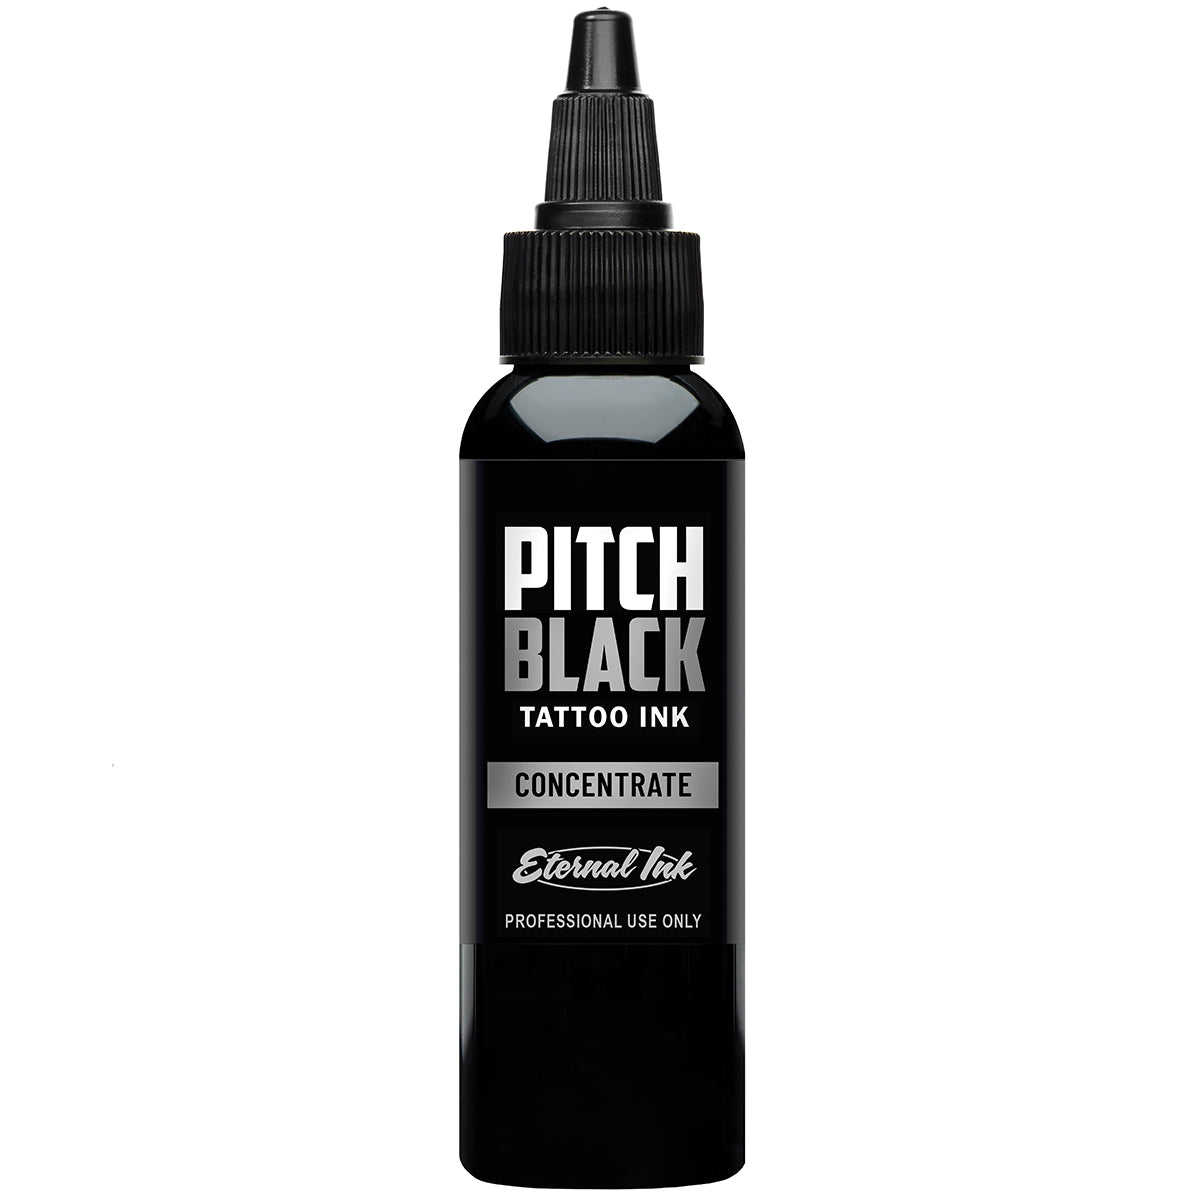 Pitch Black Concentrate